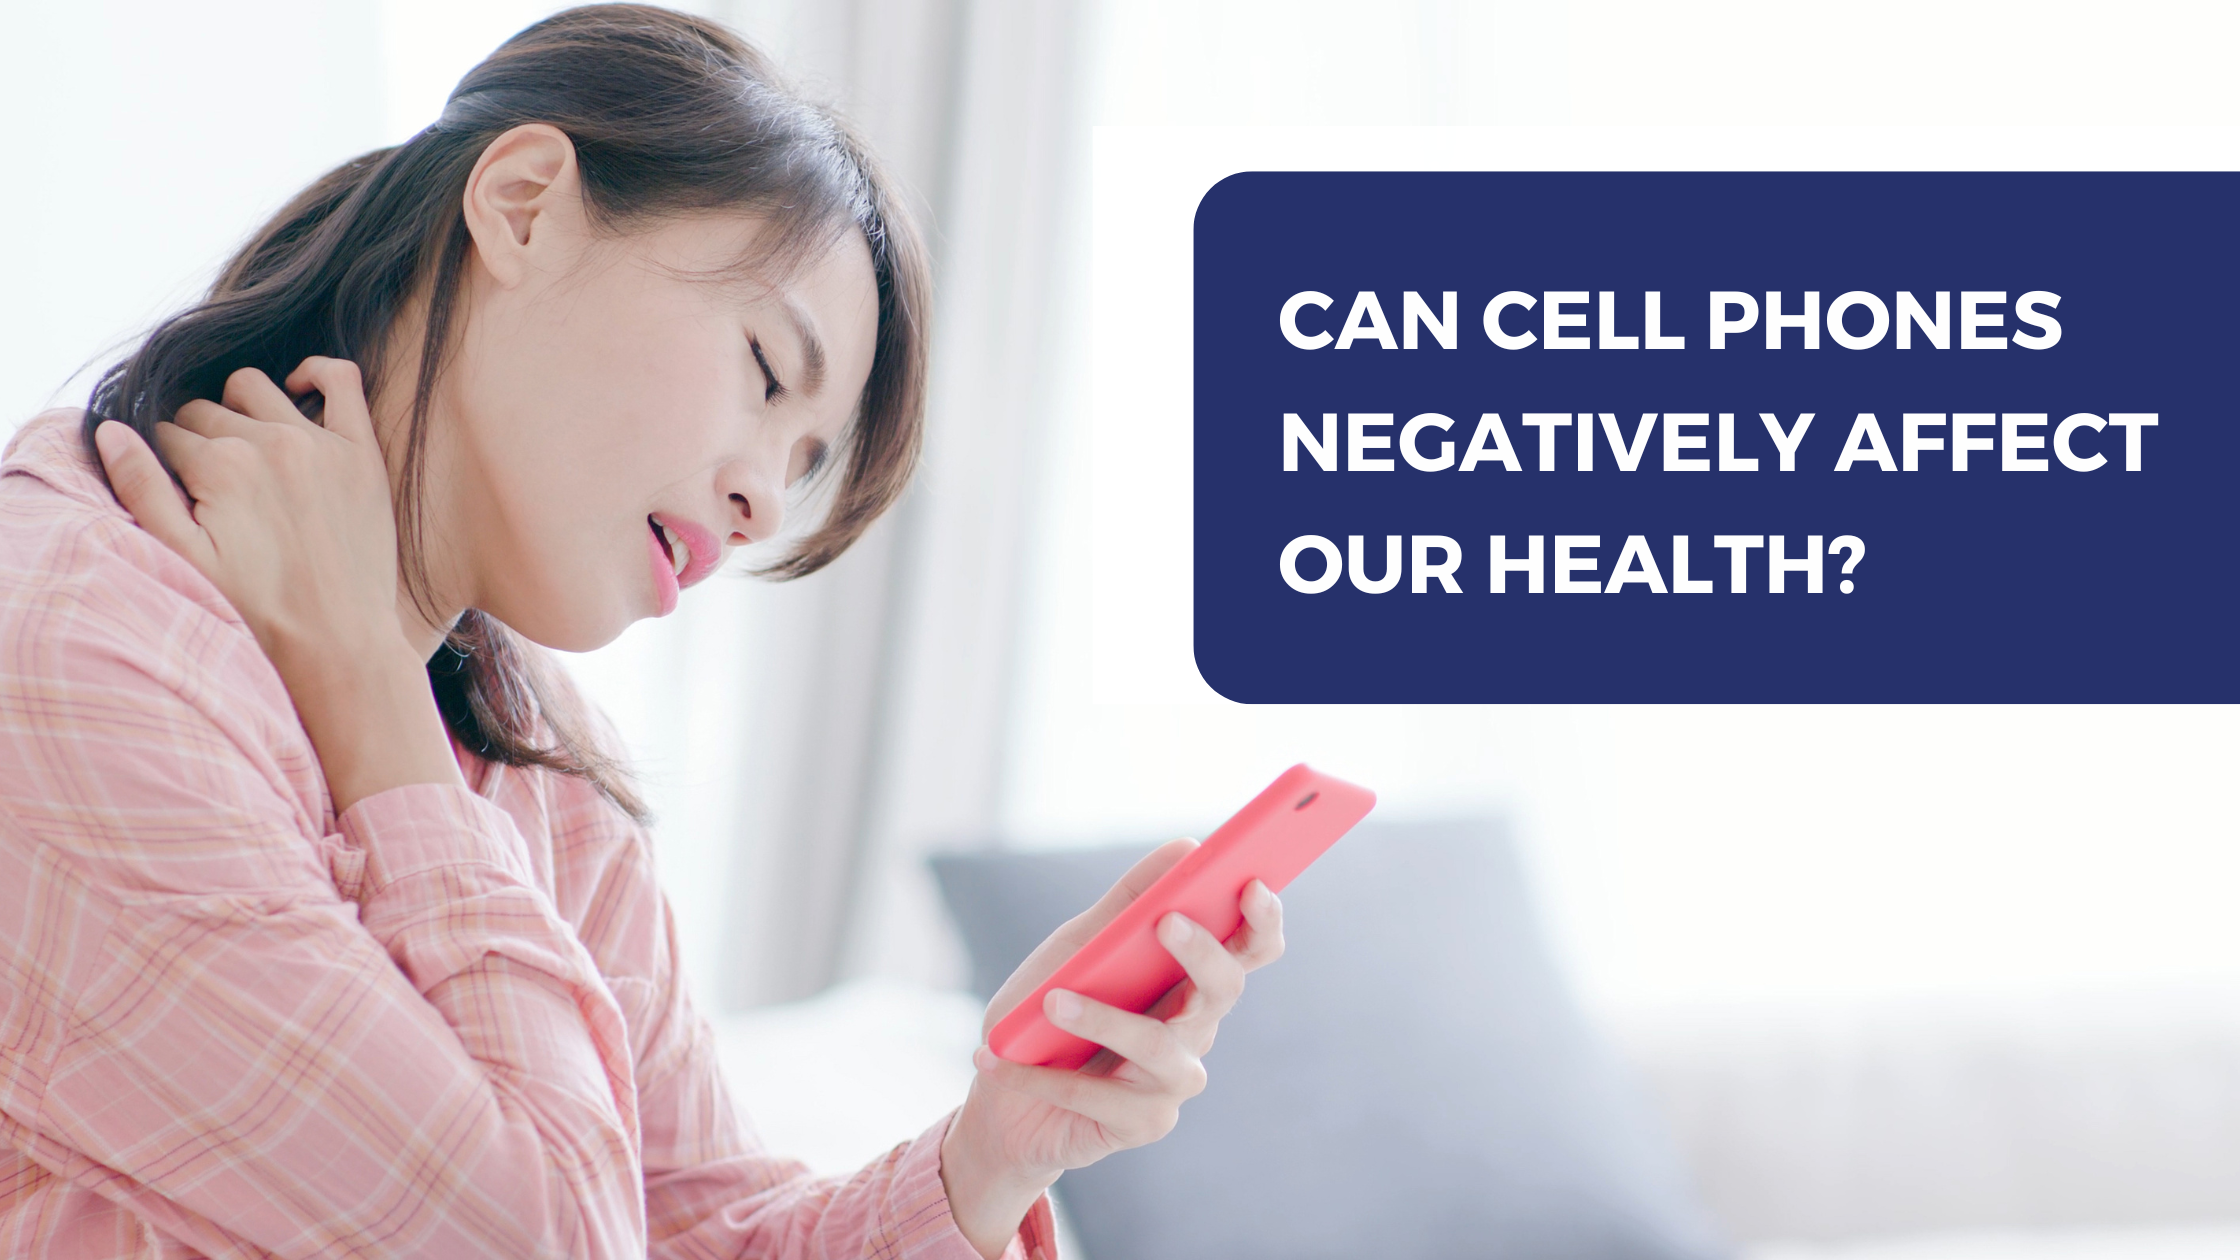 Can cell phones negatively affect our health?